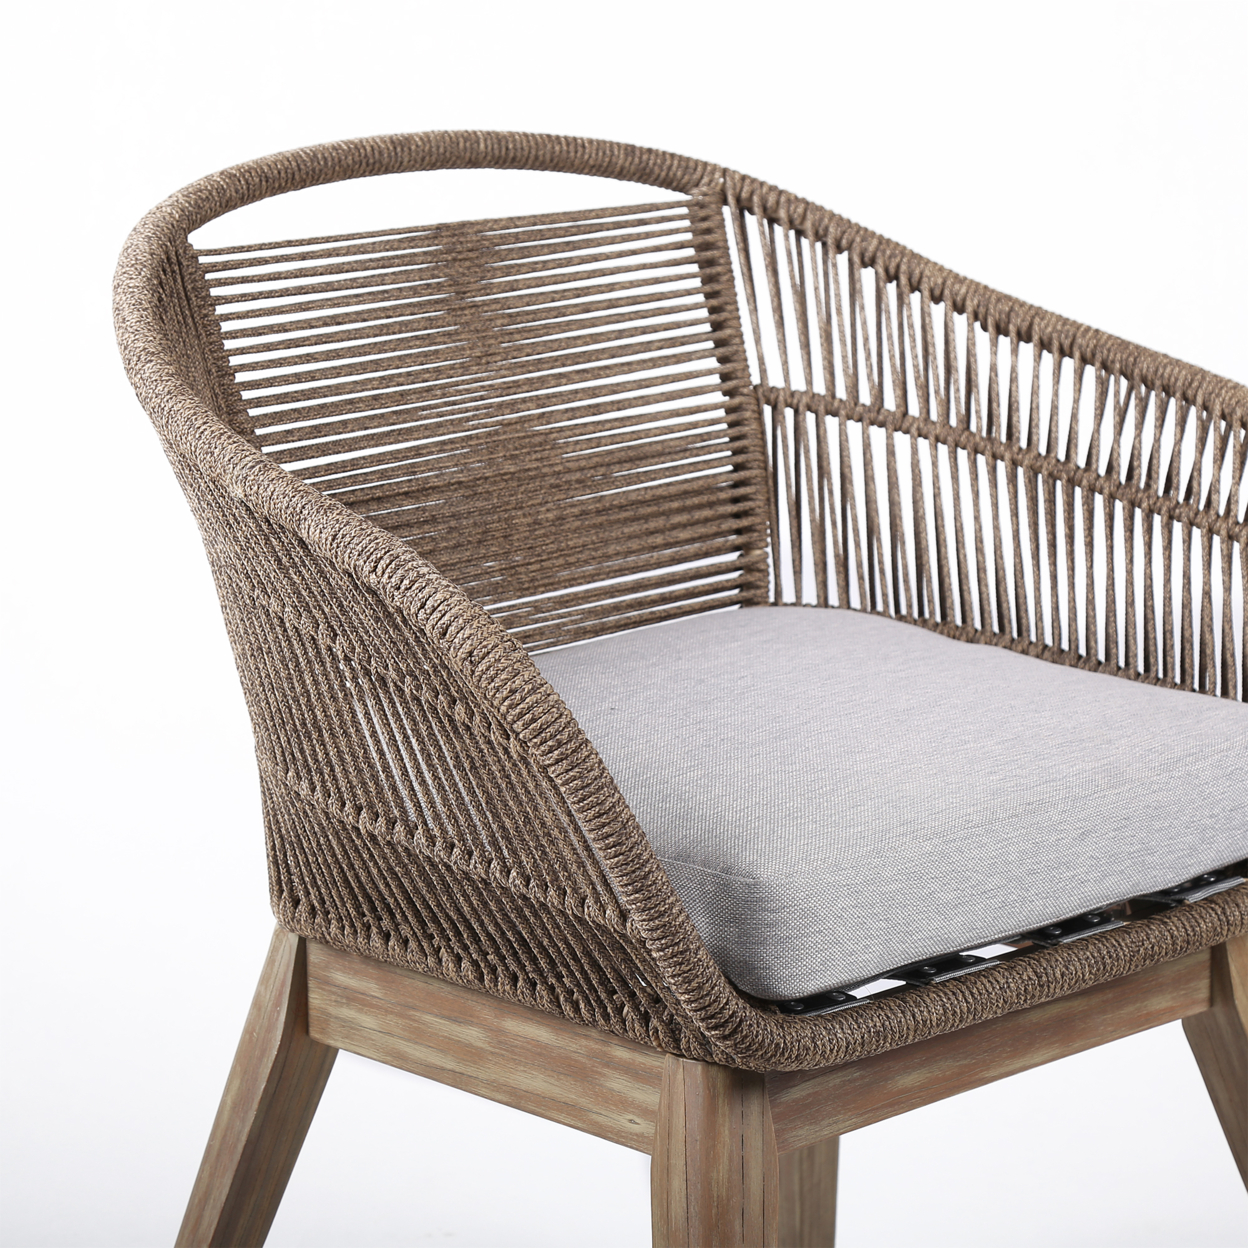 Indoor Outdoor Dining Chair With Fishbone Woven Curved Back, Brown- Saltoro Sherpi